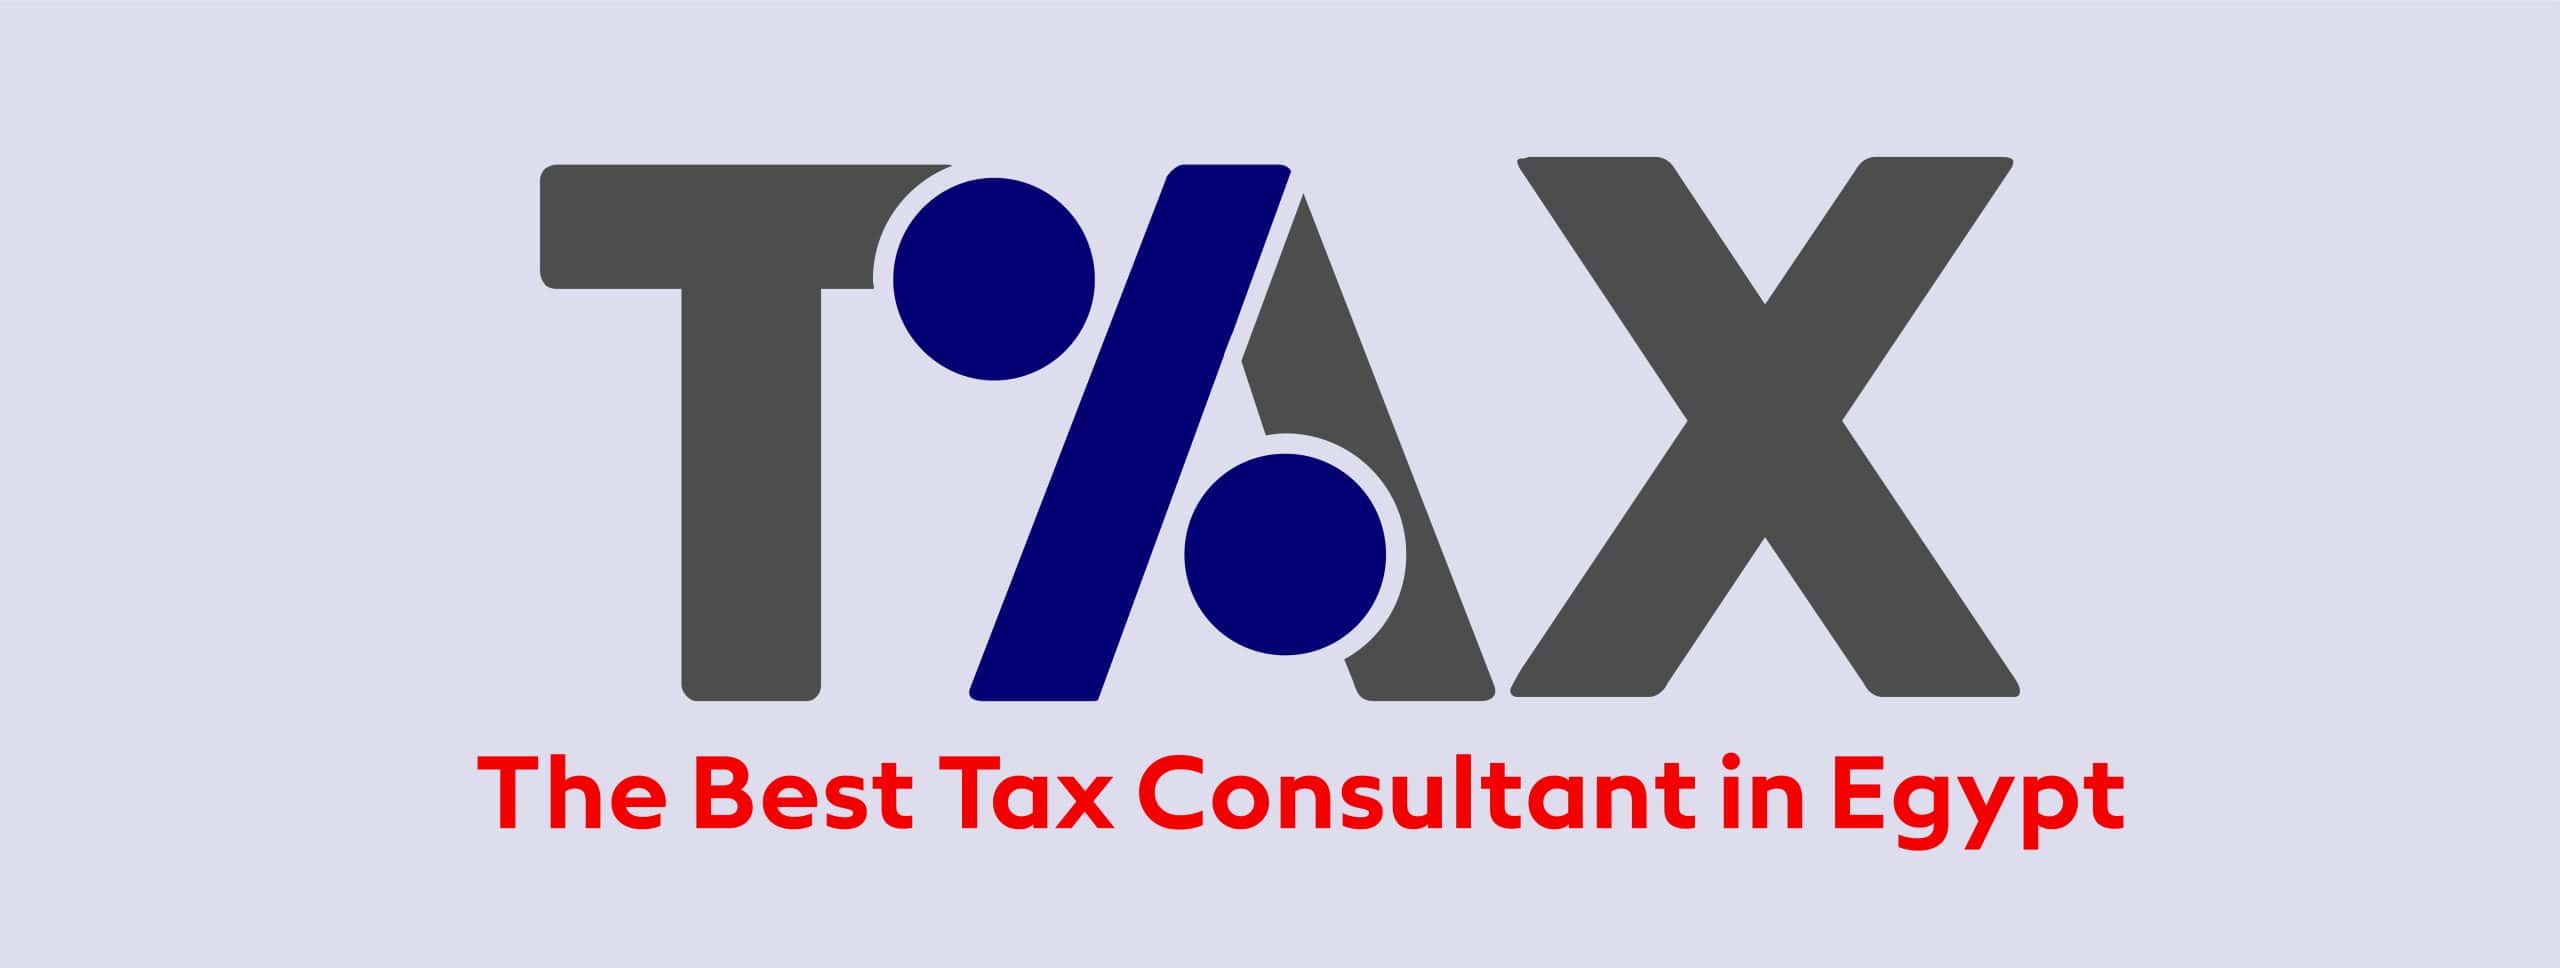 Best Tax Consultant in Egypt